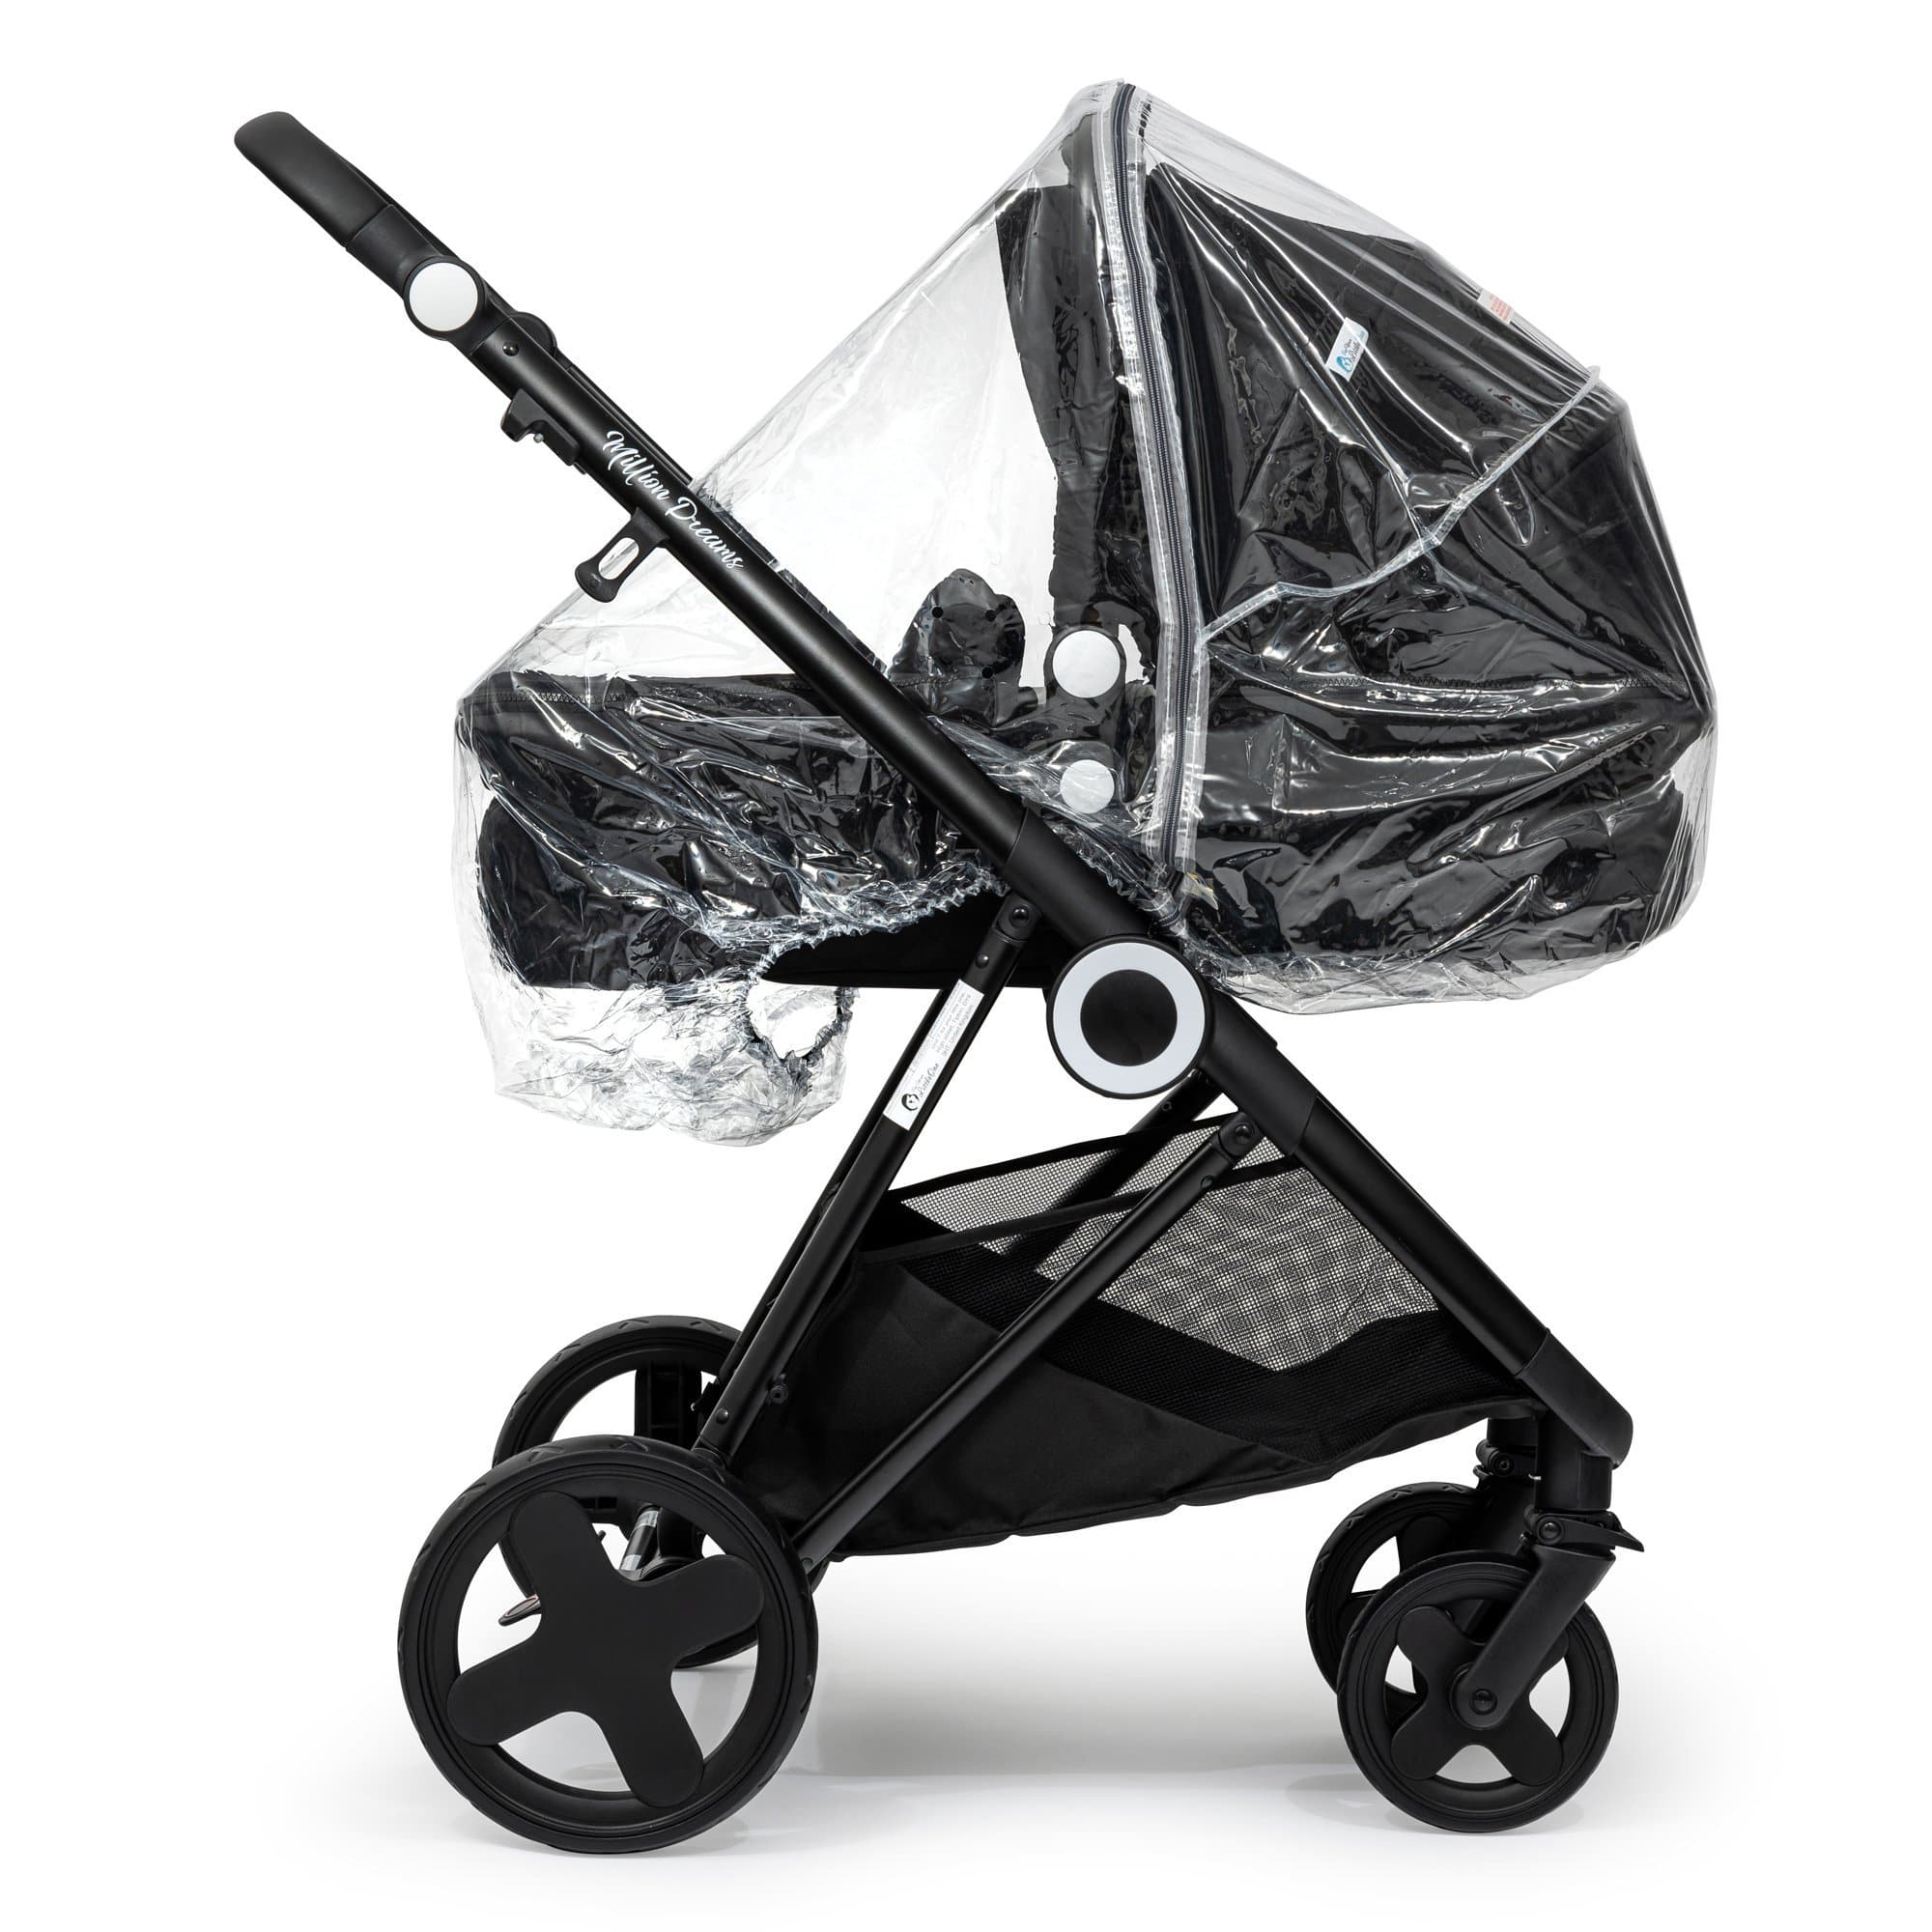 2 in 1 Rain Cover Compatible with Kiddy - Fits All Models - For Your Little One